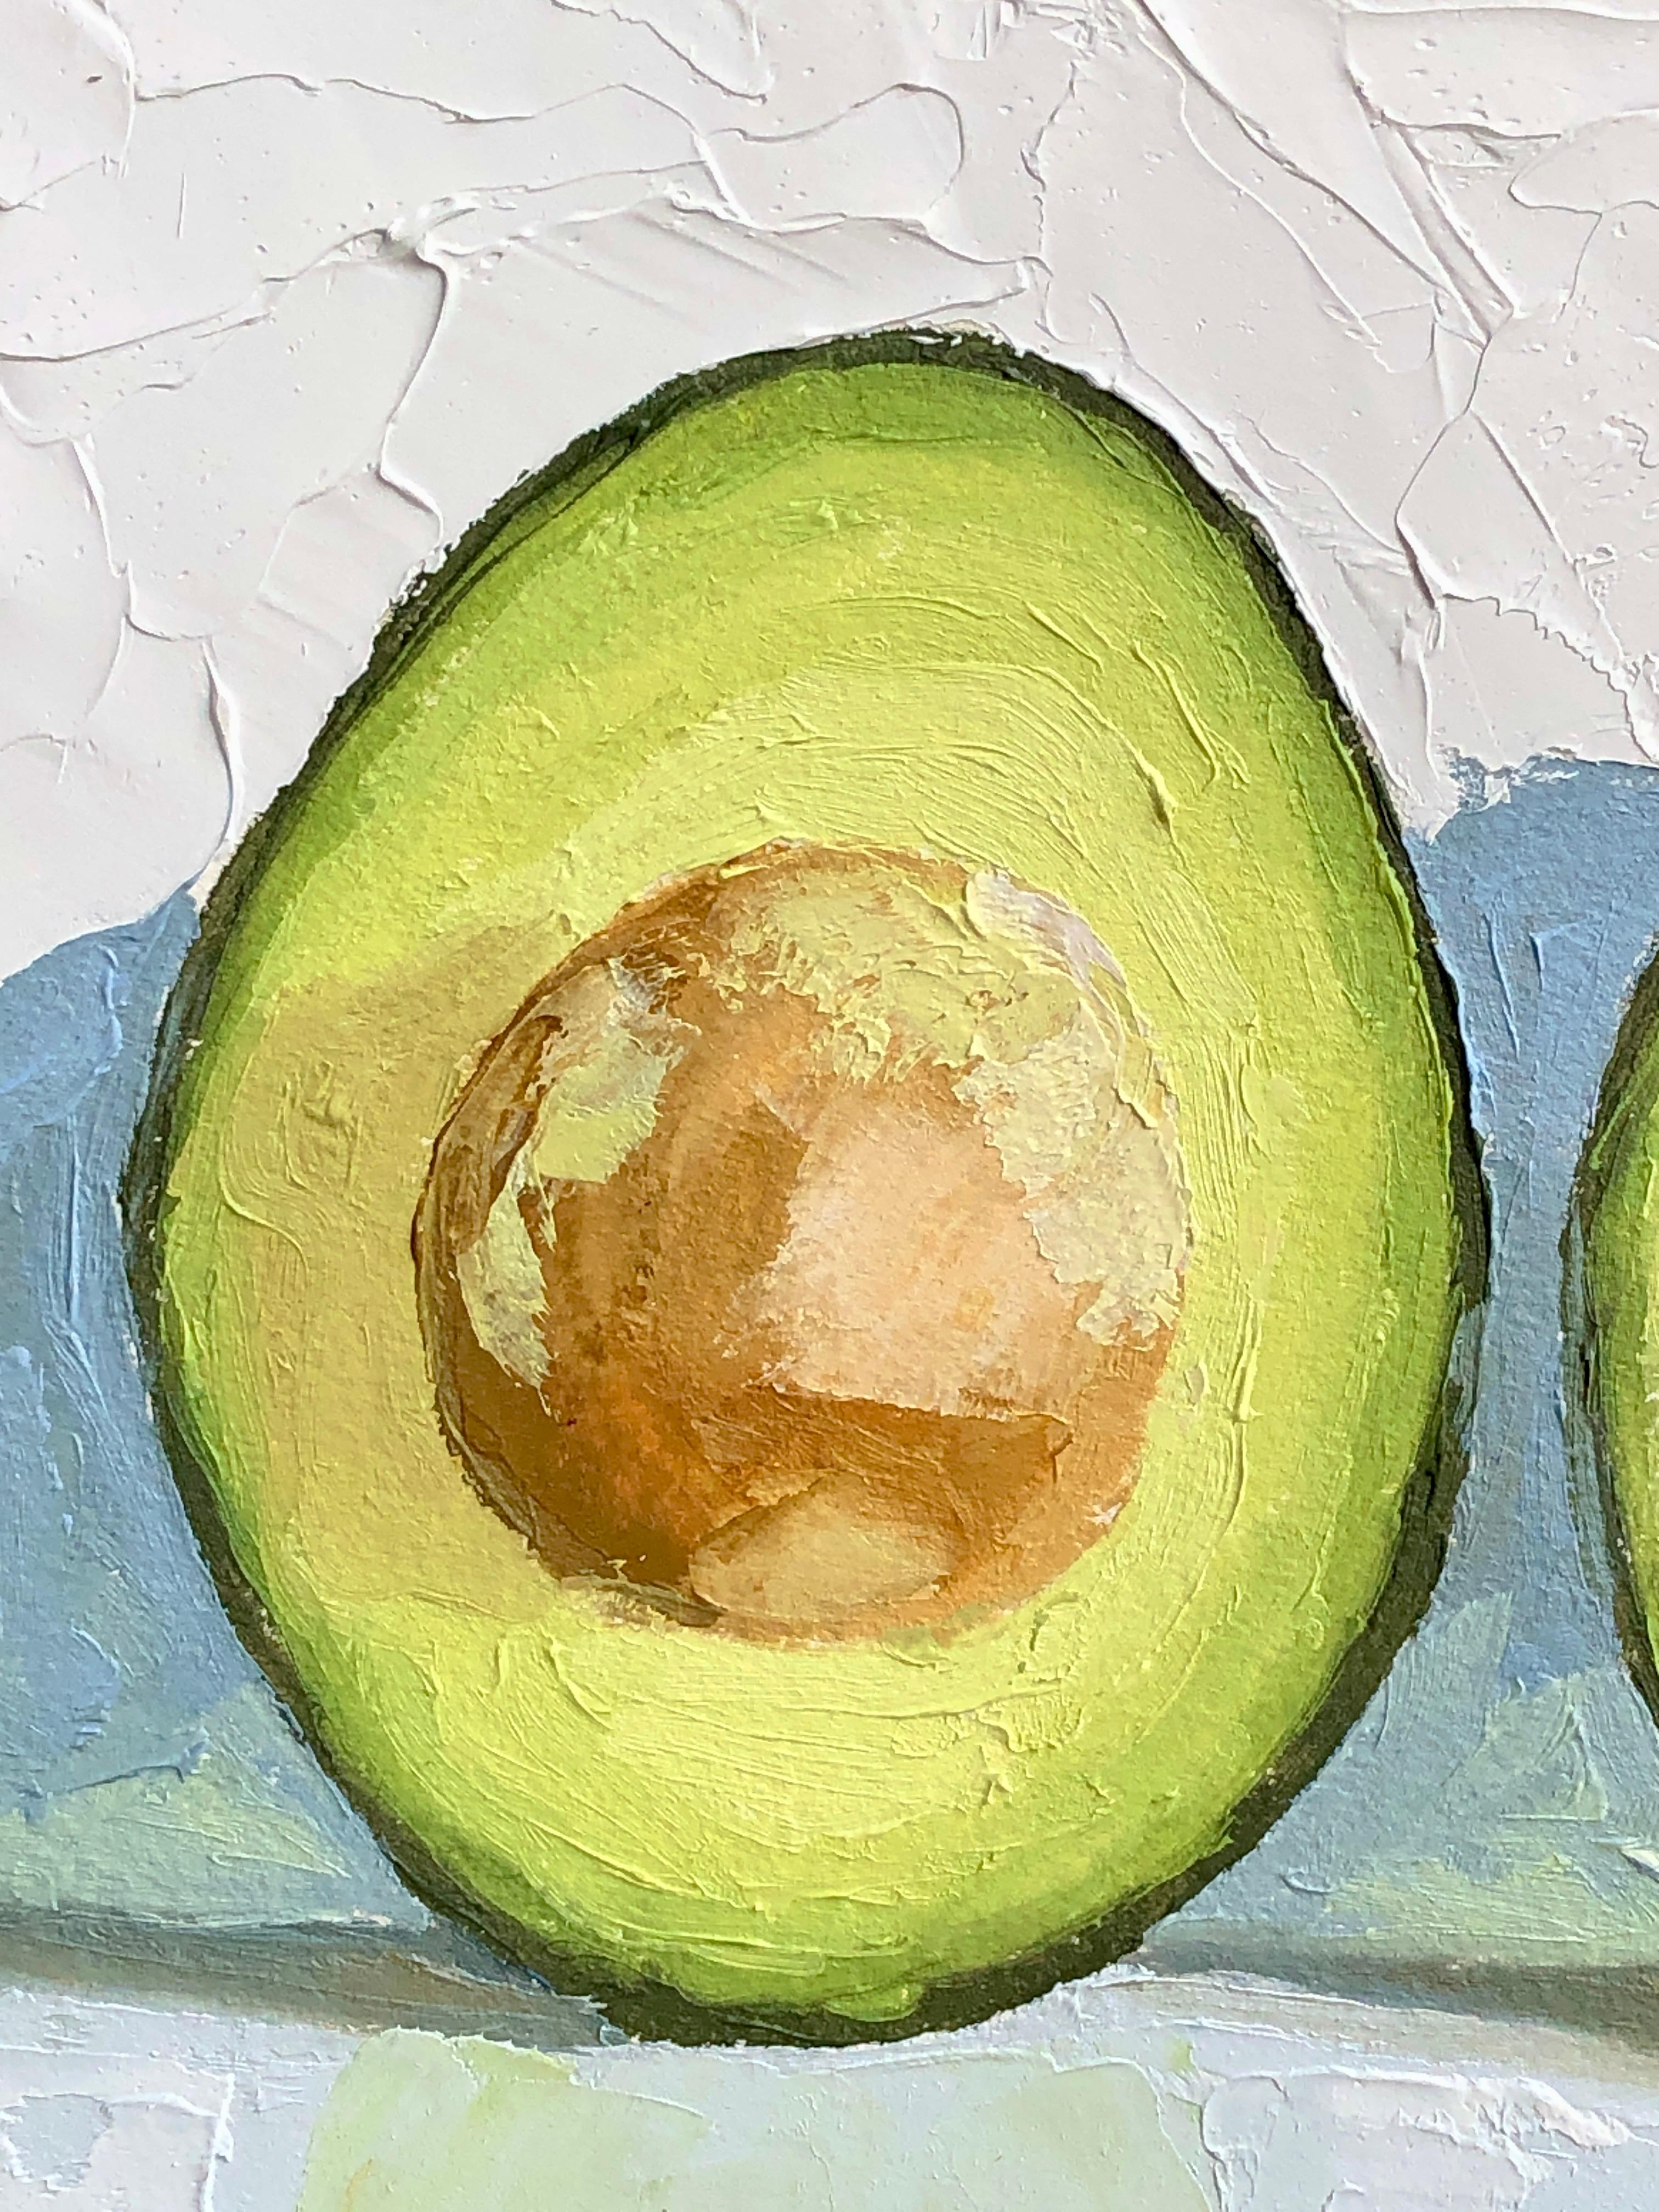 <p>Artist Comments<br>Artist Karen Barton displays a luscious still life of avocado halves set against a softly textured white backdrop. With skillful brushstrokes and palette knife techniques, Karen captures the fruit's velvety smoothness and rich